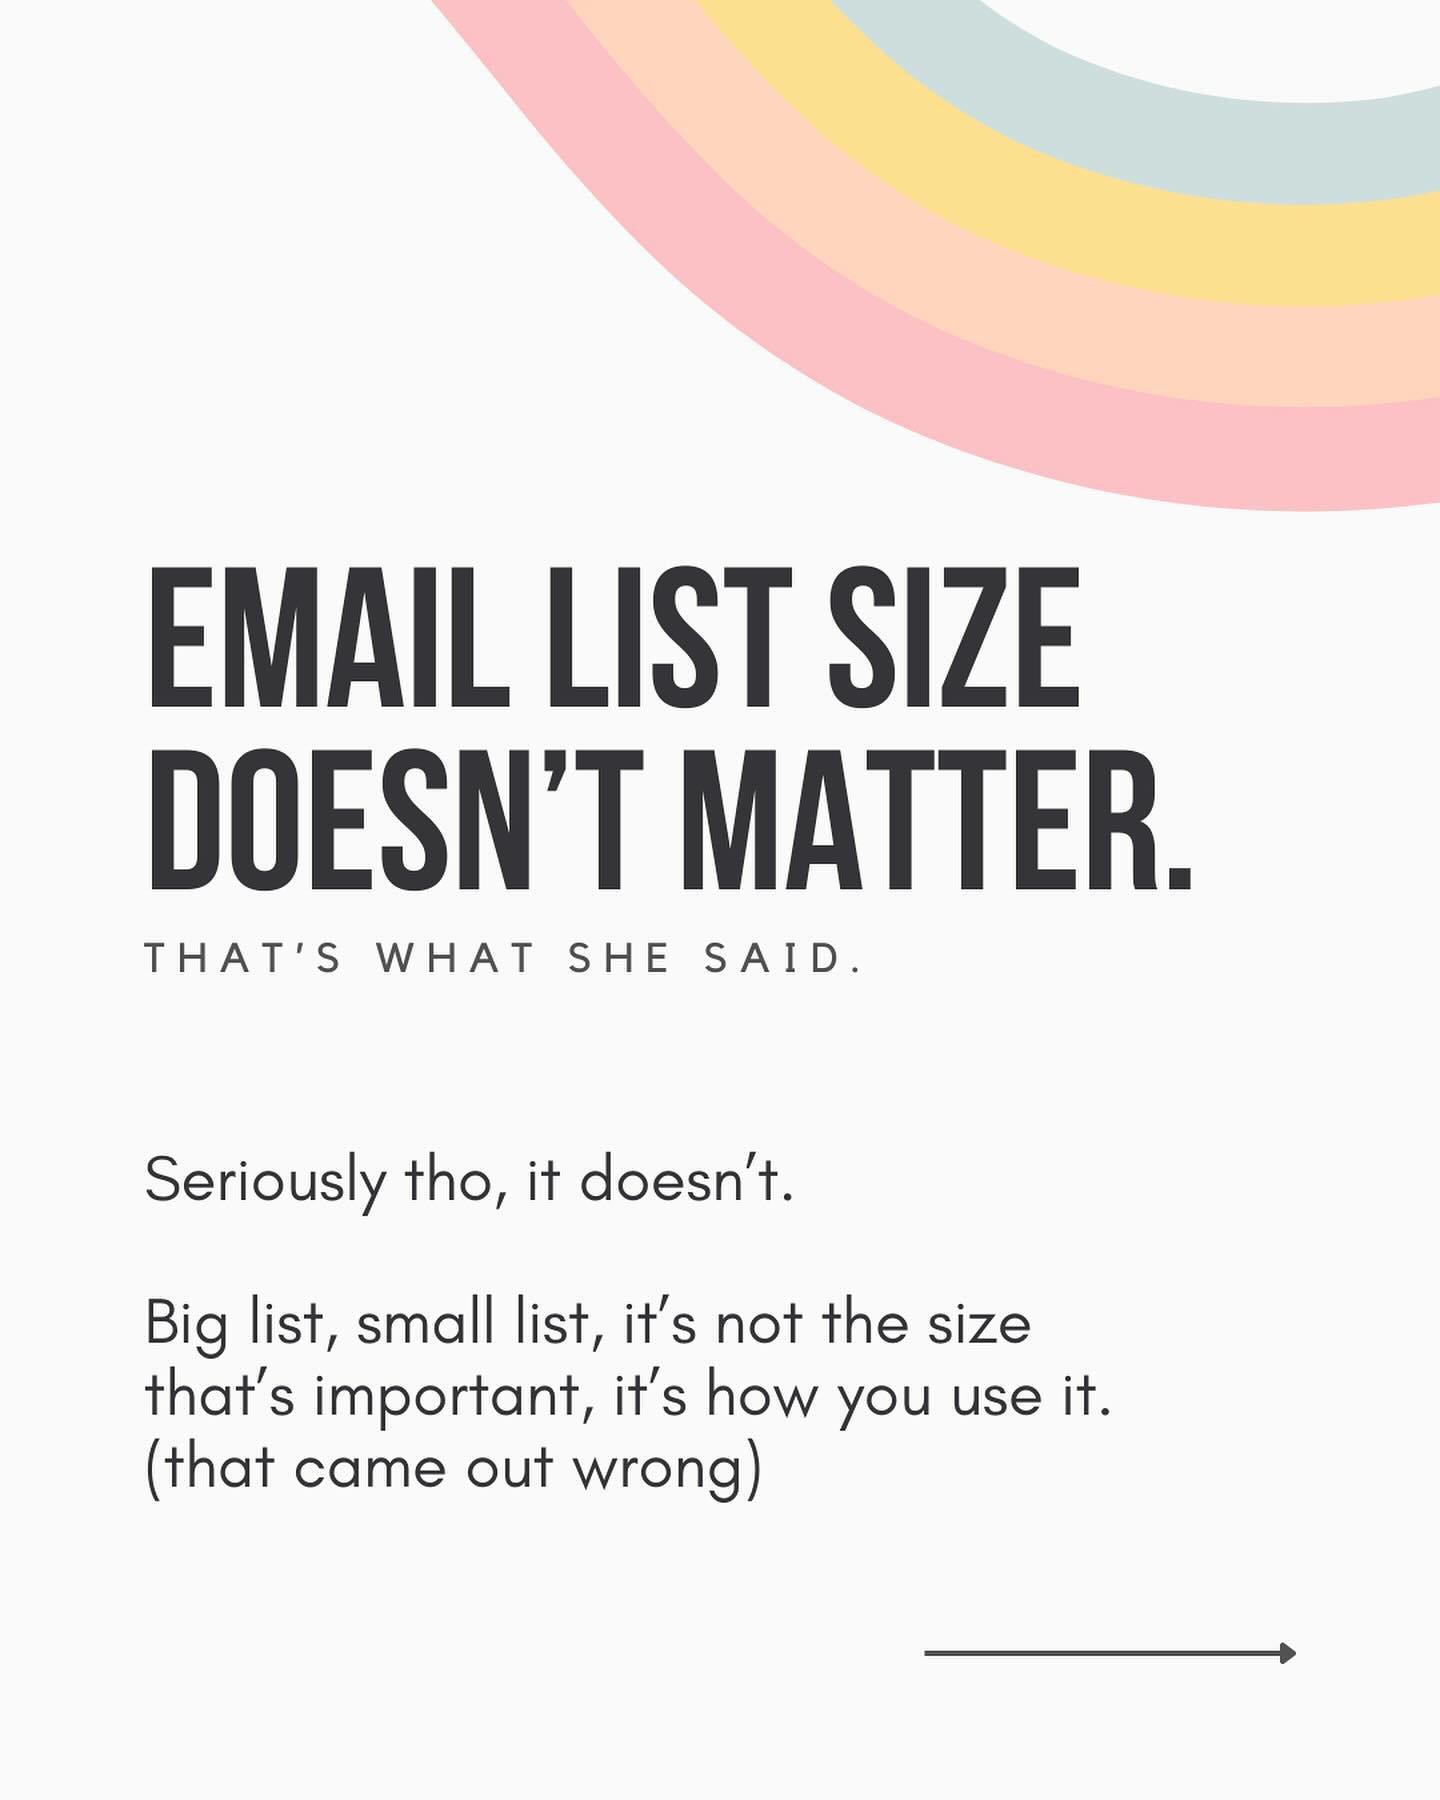 &ldquo;my list is so small 😭&rdquo; 

I&rsquo;ve said it before and I&rsquo;ll say it again: never underestimate the power of a small email list! because a small list is MIGHTY!! 

some of the amazing success I&rsquo;ve had with small lists:
💌 sold